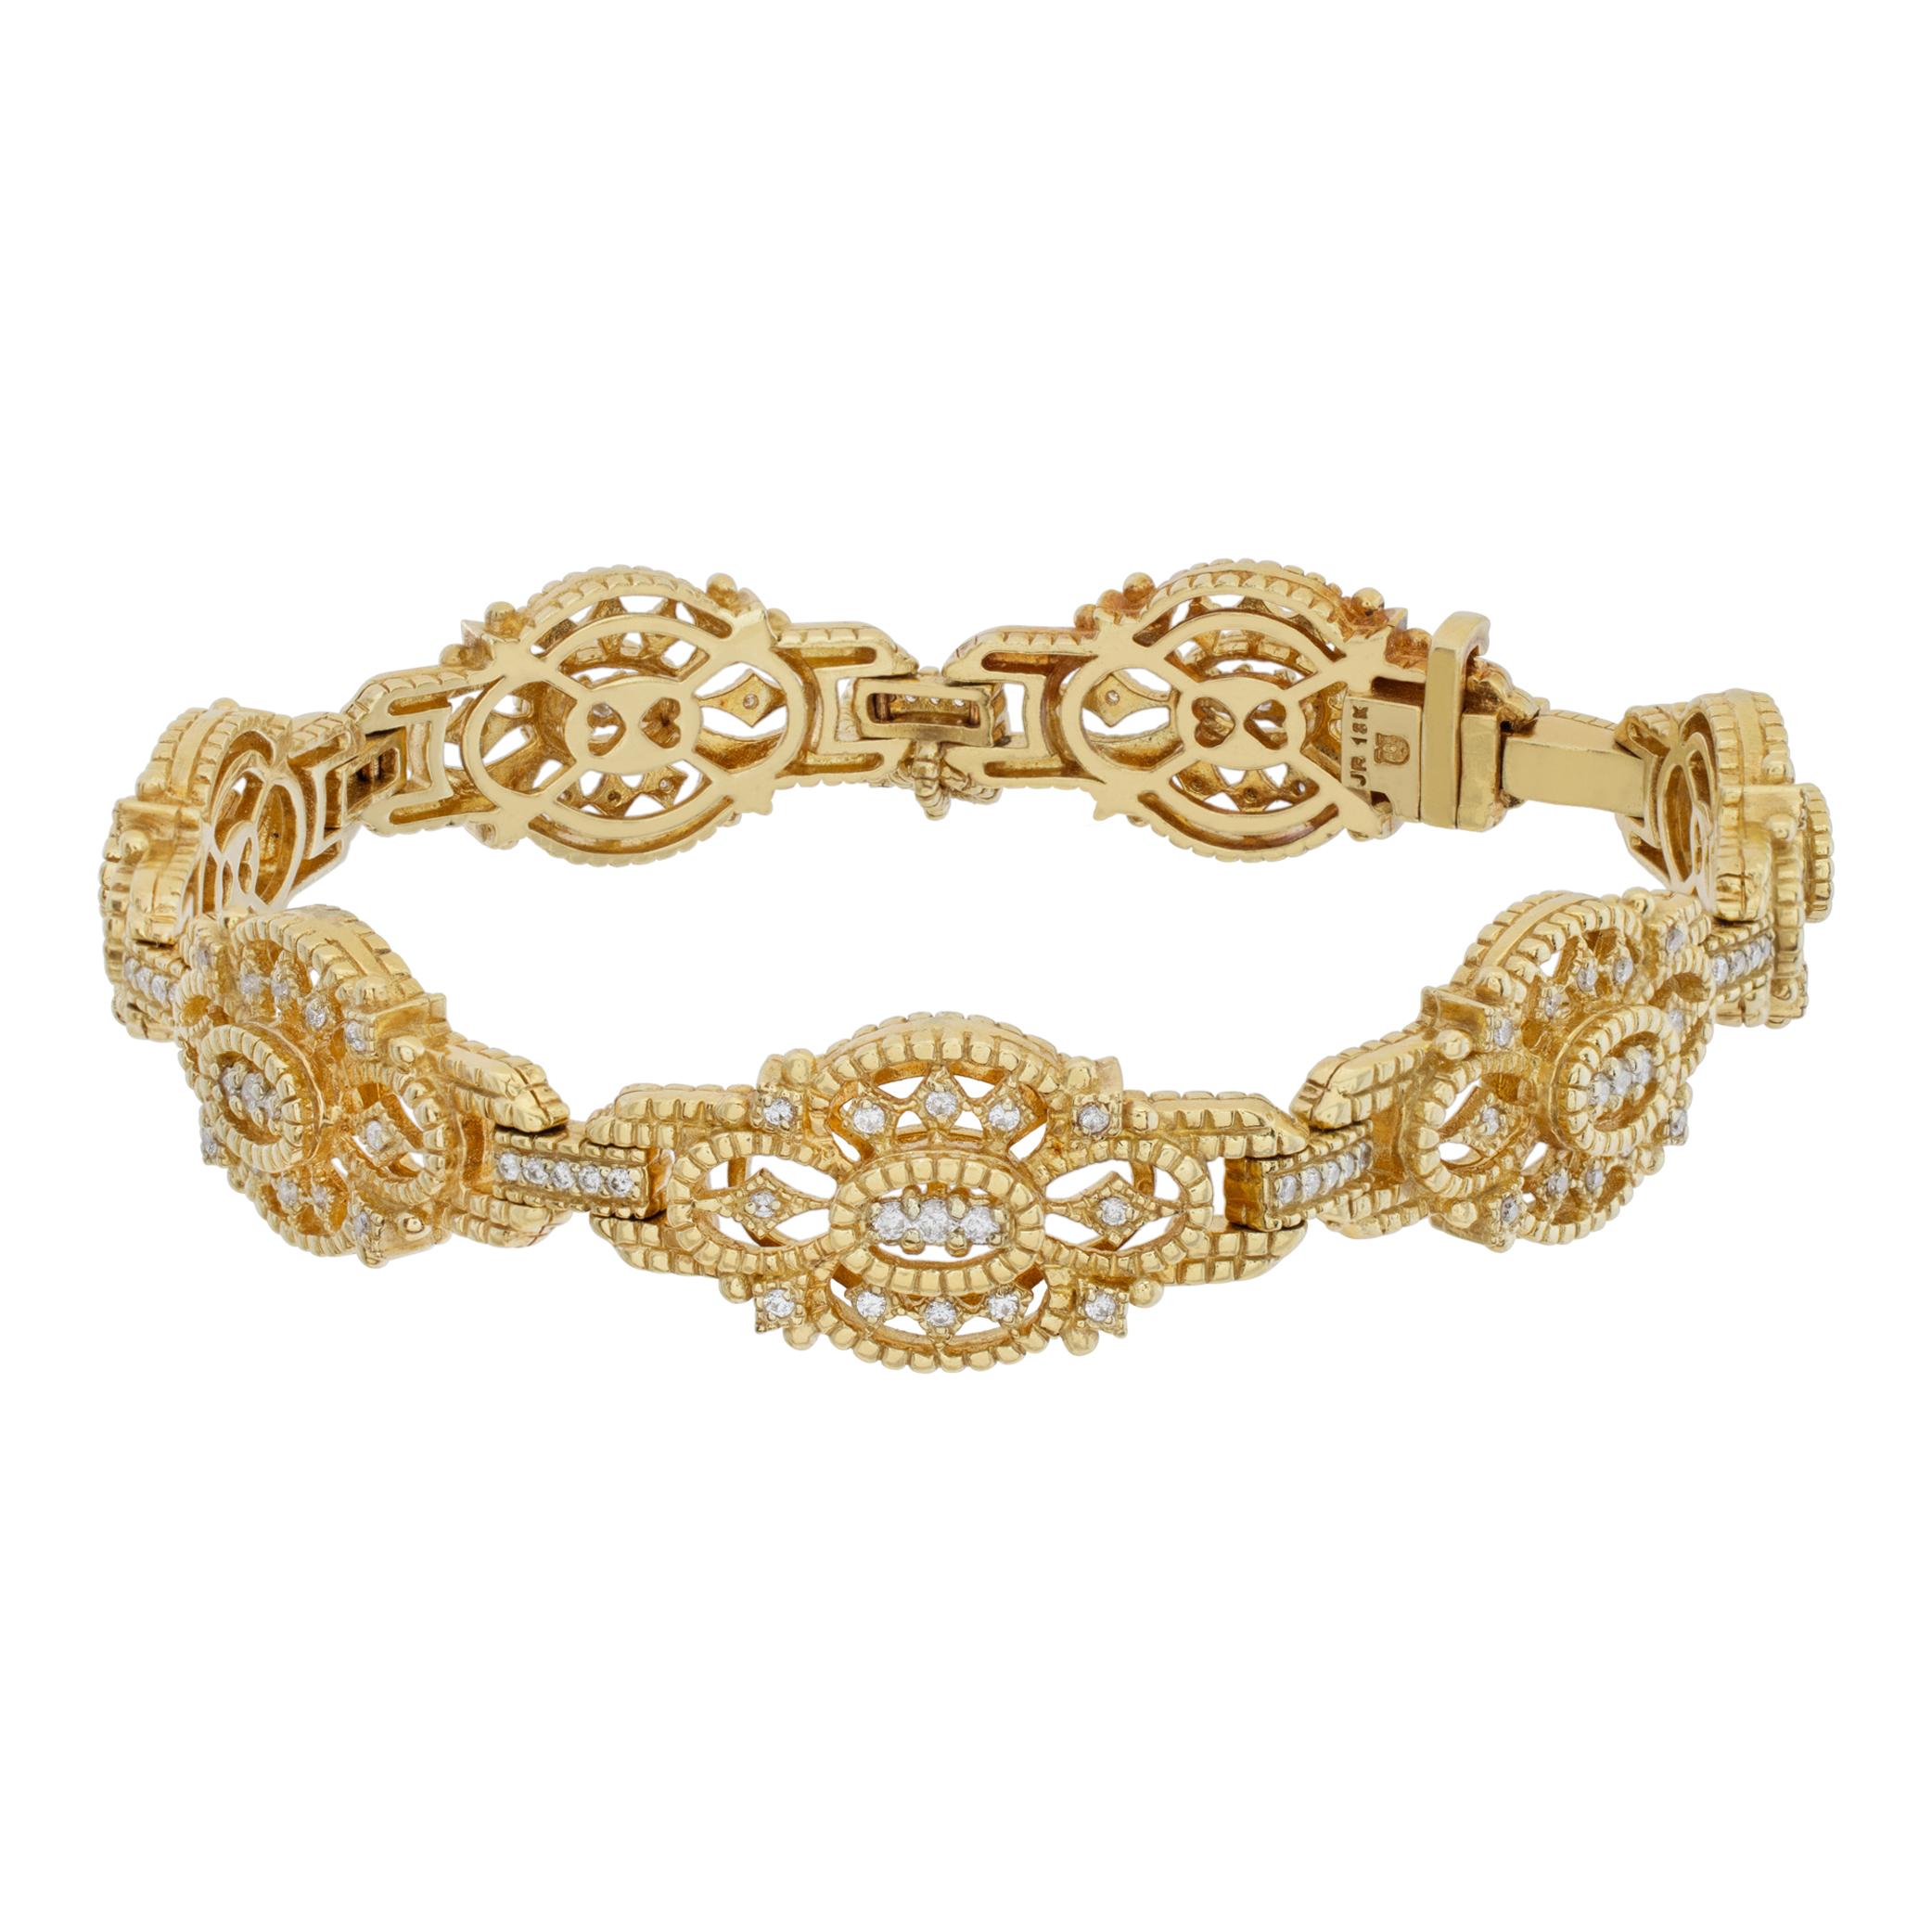 Judith Ripka diamond bracelet in 18k yellow gold with approximately 0.95 carats in diamonds. 7 inch length.